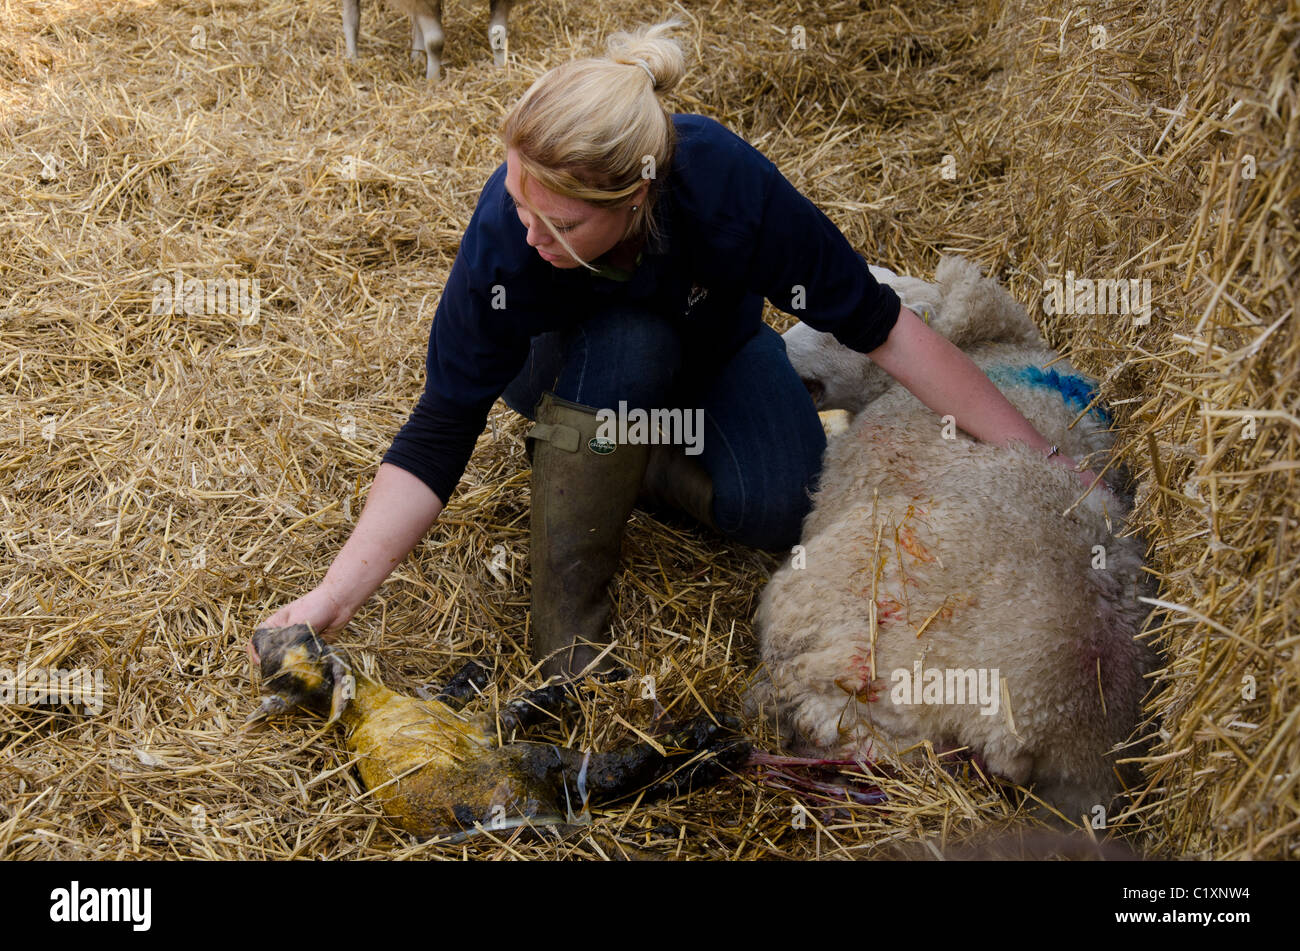 One of the ewes was struggling with giving birth and needed a helping hand. She gave birth to twins! Stock Photo